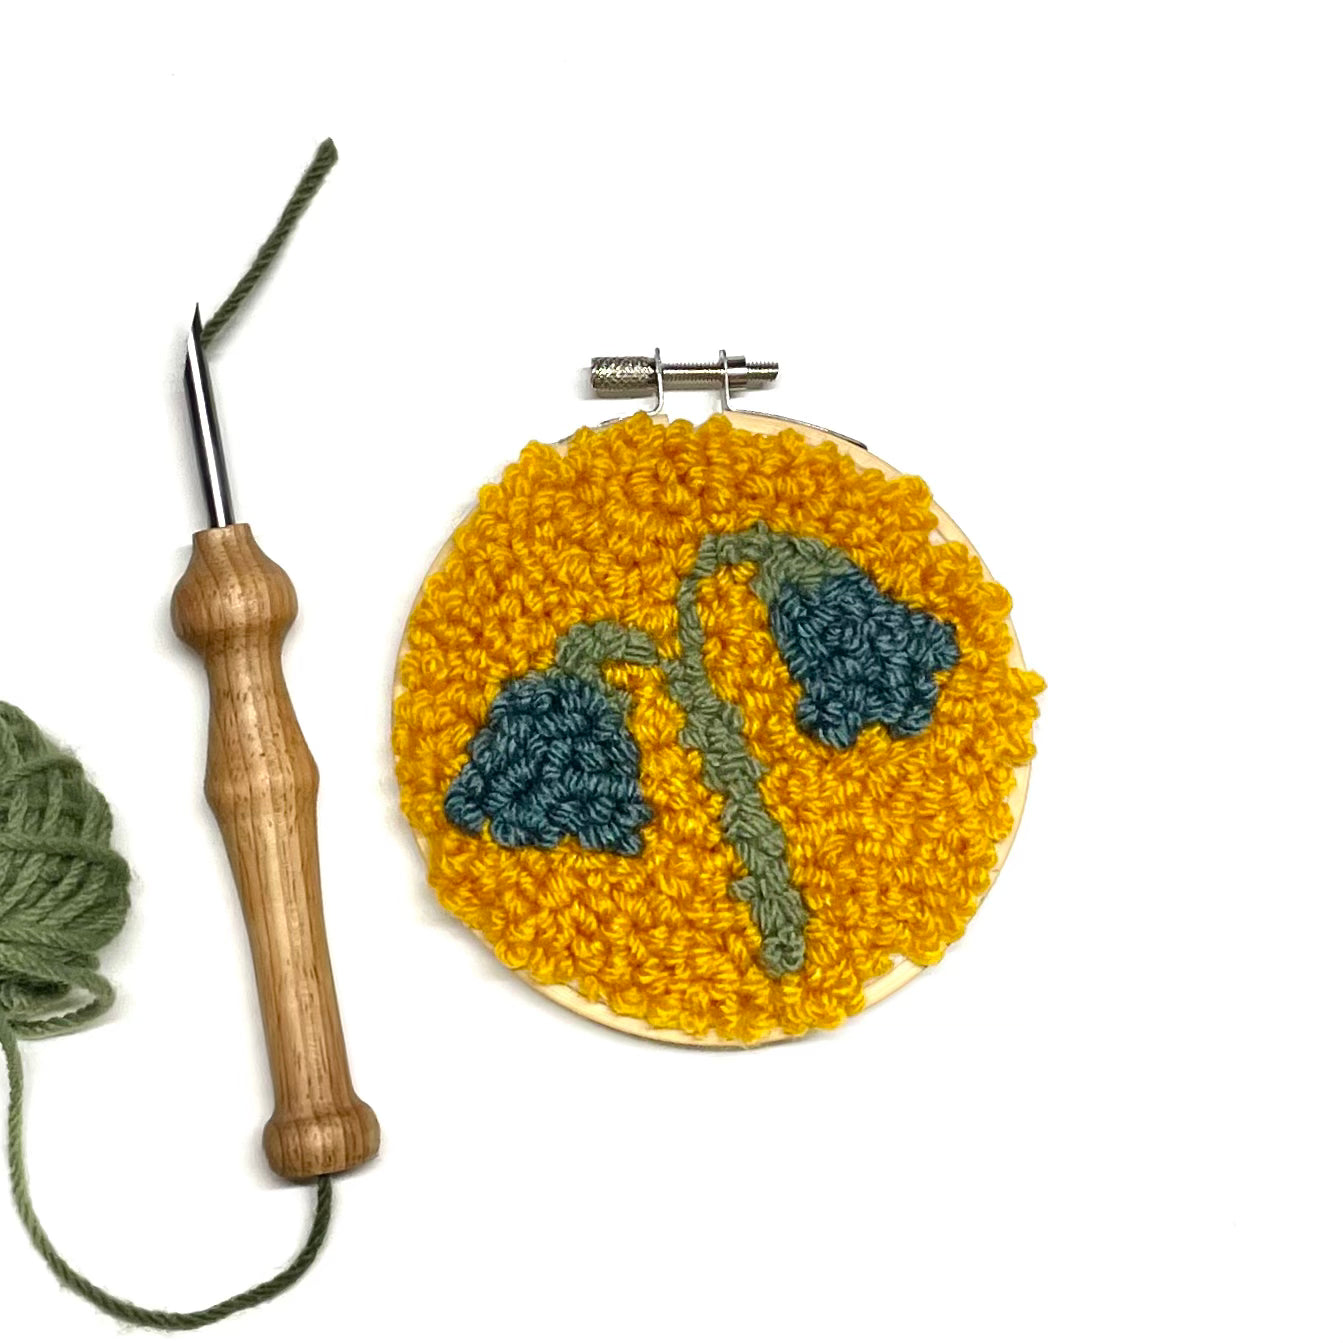 Punch Needle Embroidery Kits